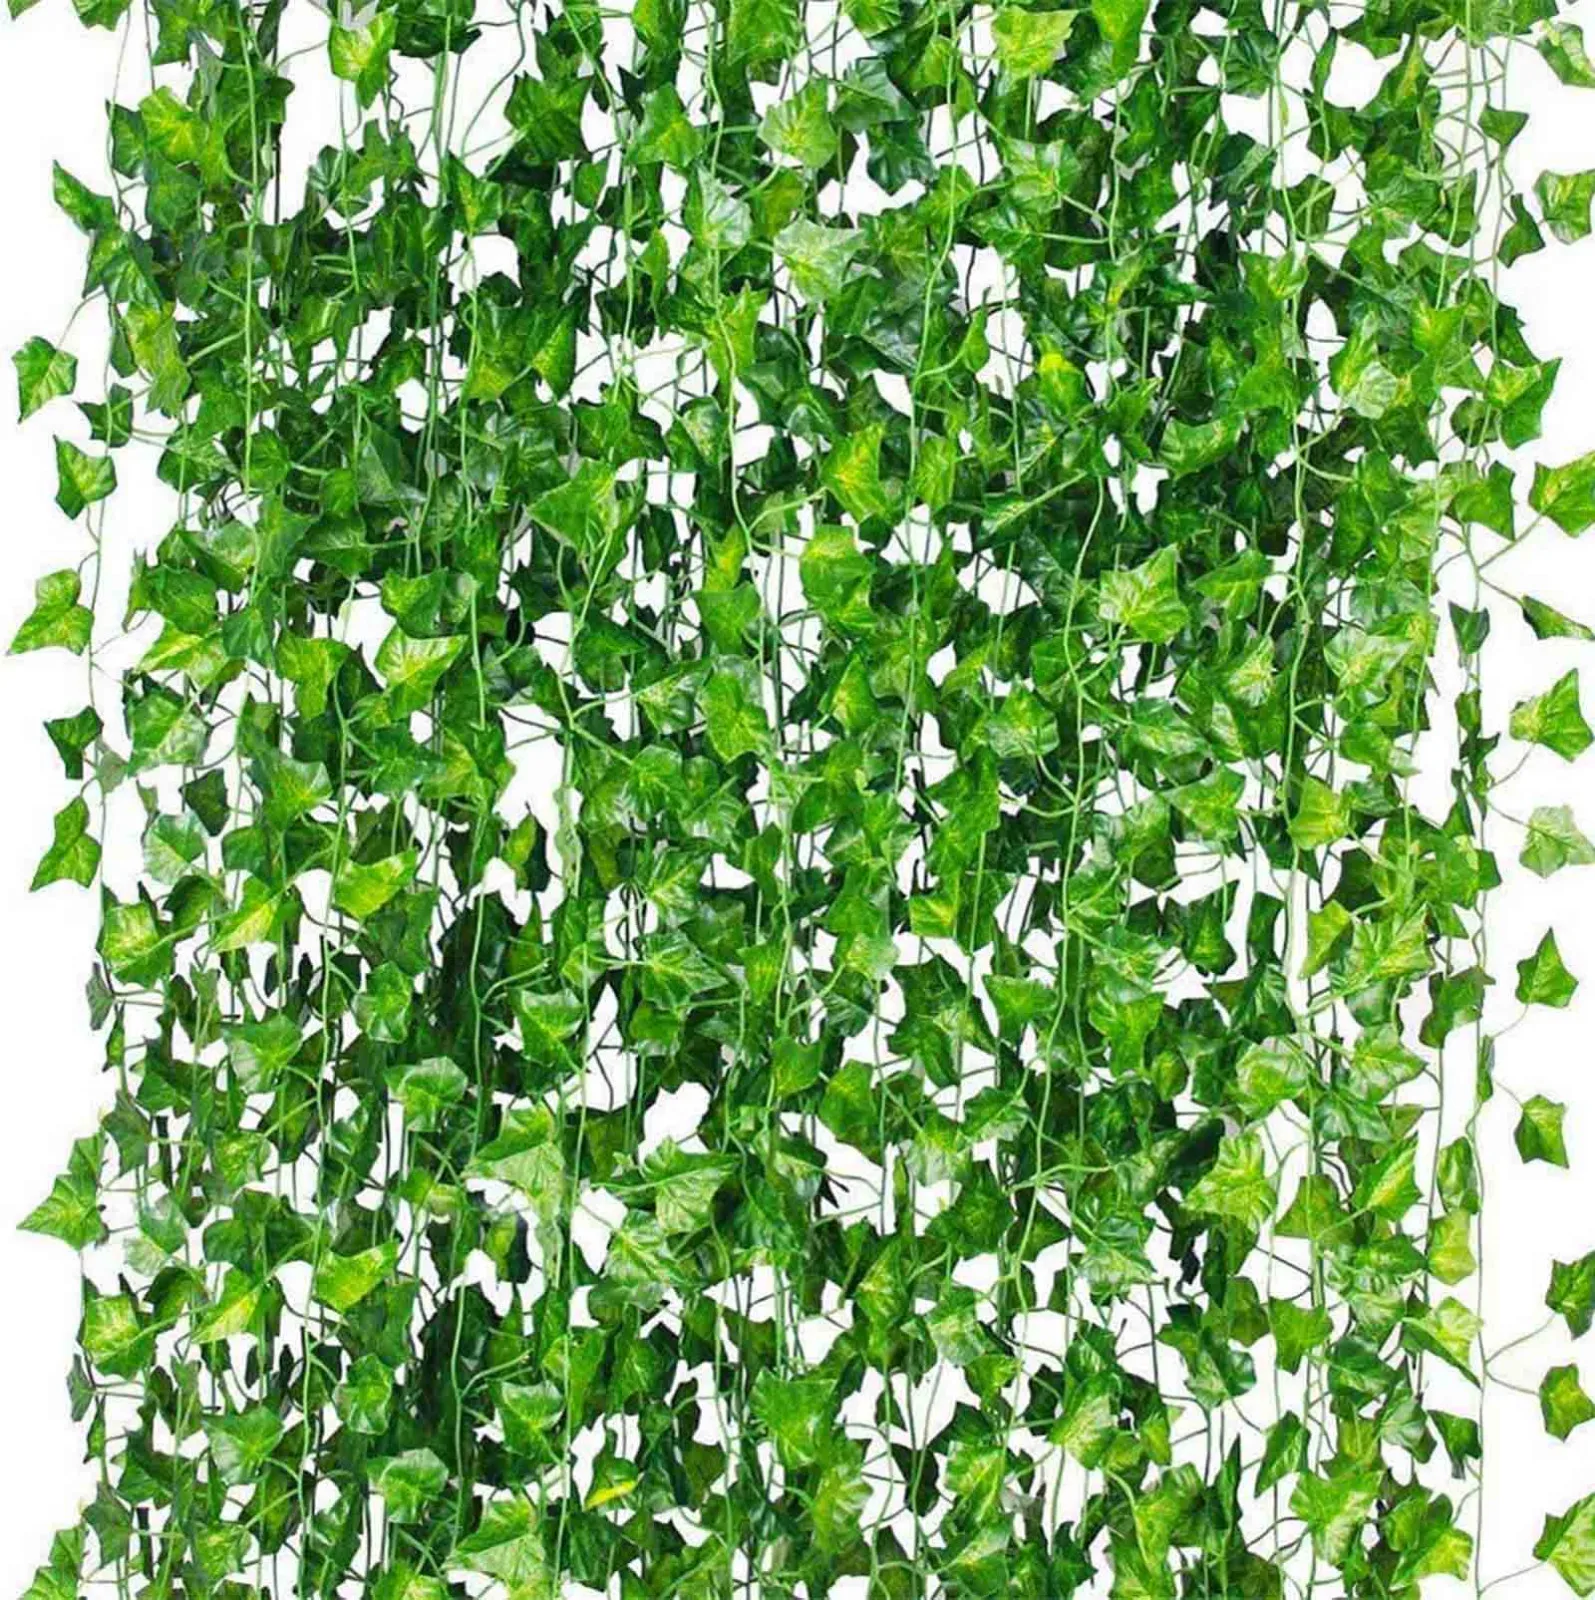 

12 Strands 86 FT Ivy green Fake Leaves Garland Plant Vine Foliage Home Decor Plastic Rattan string Wall Decor Artificial Plants